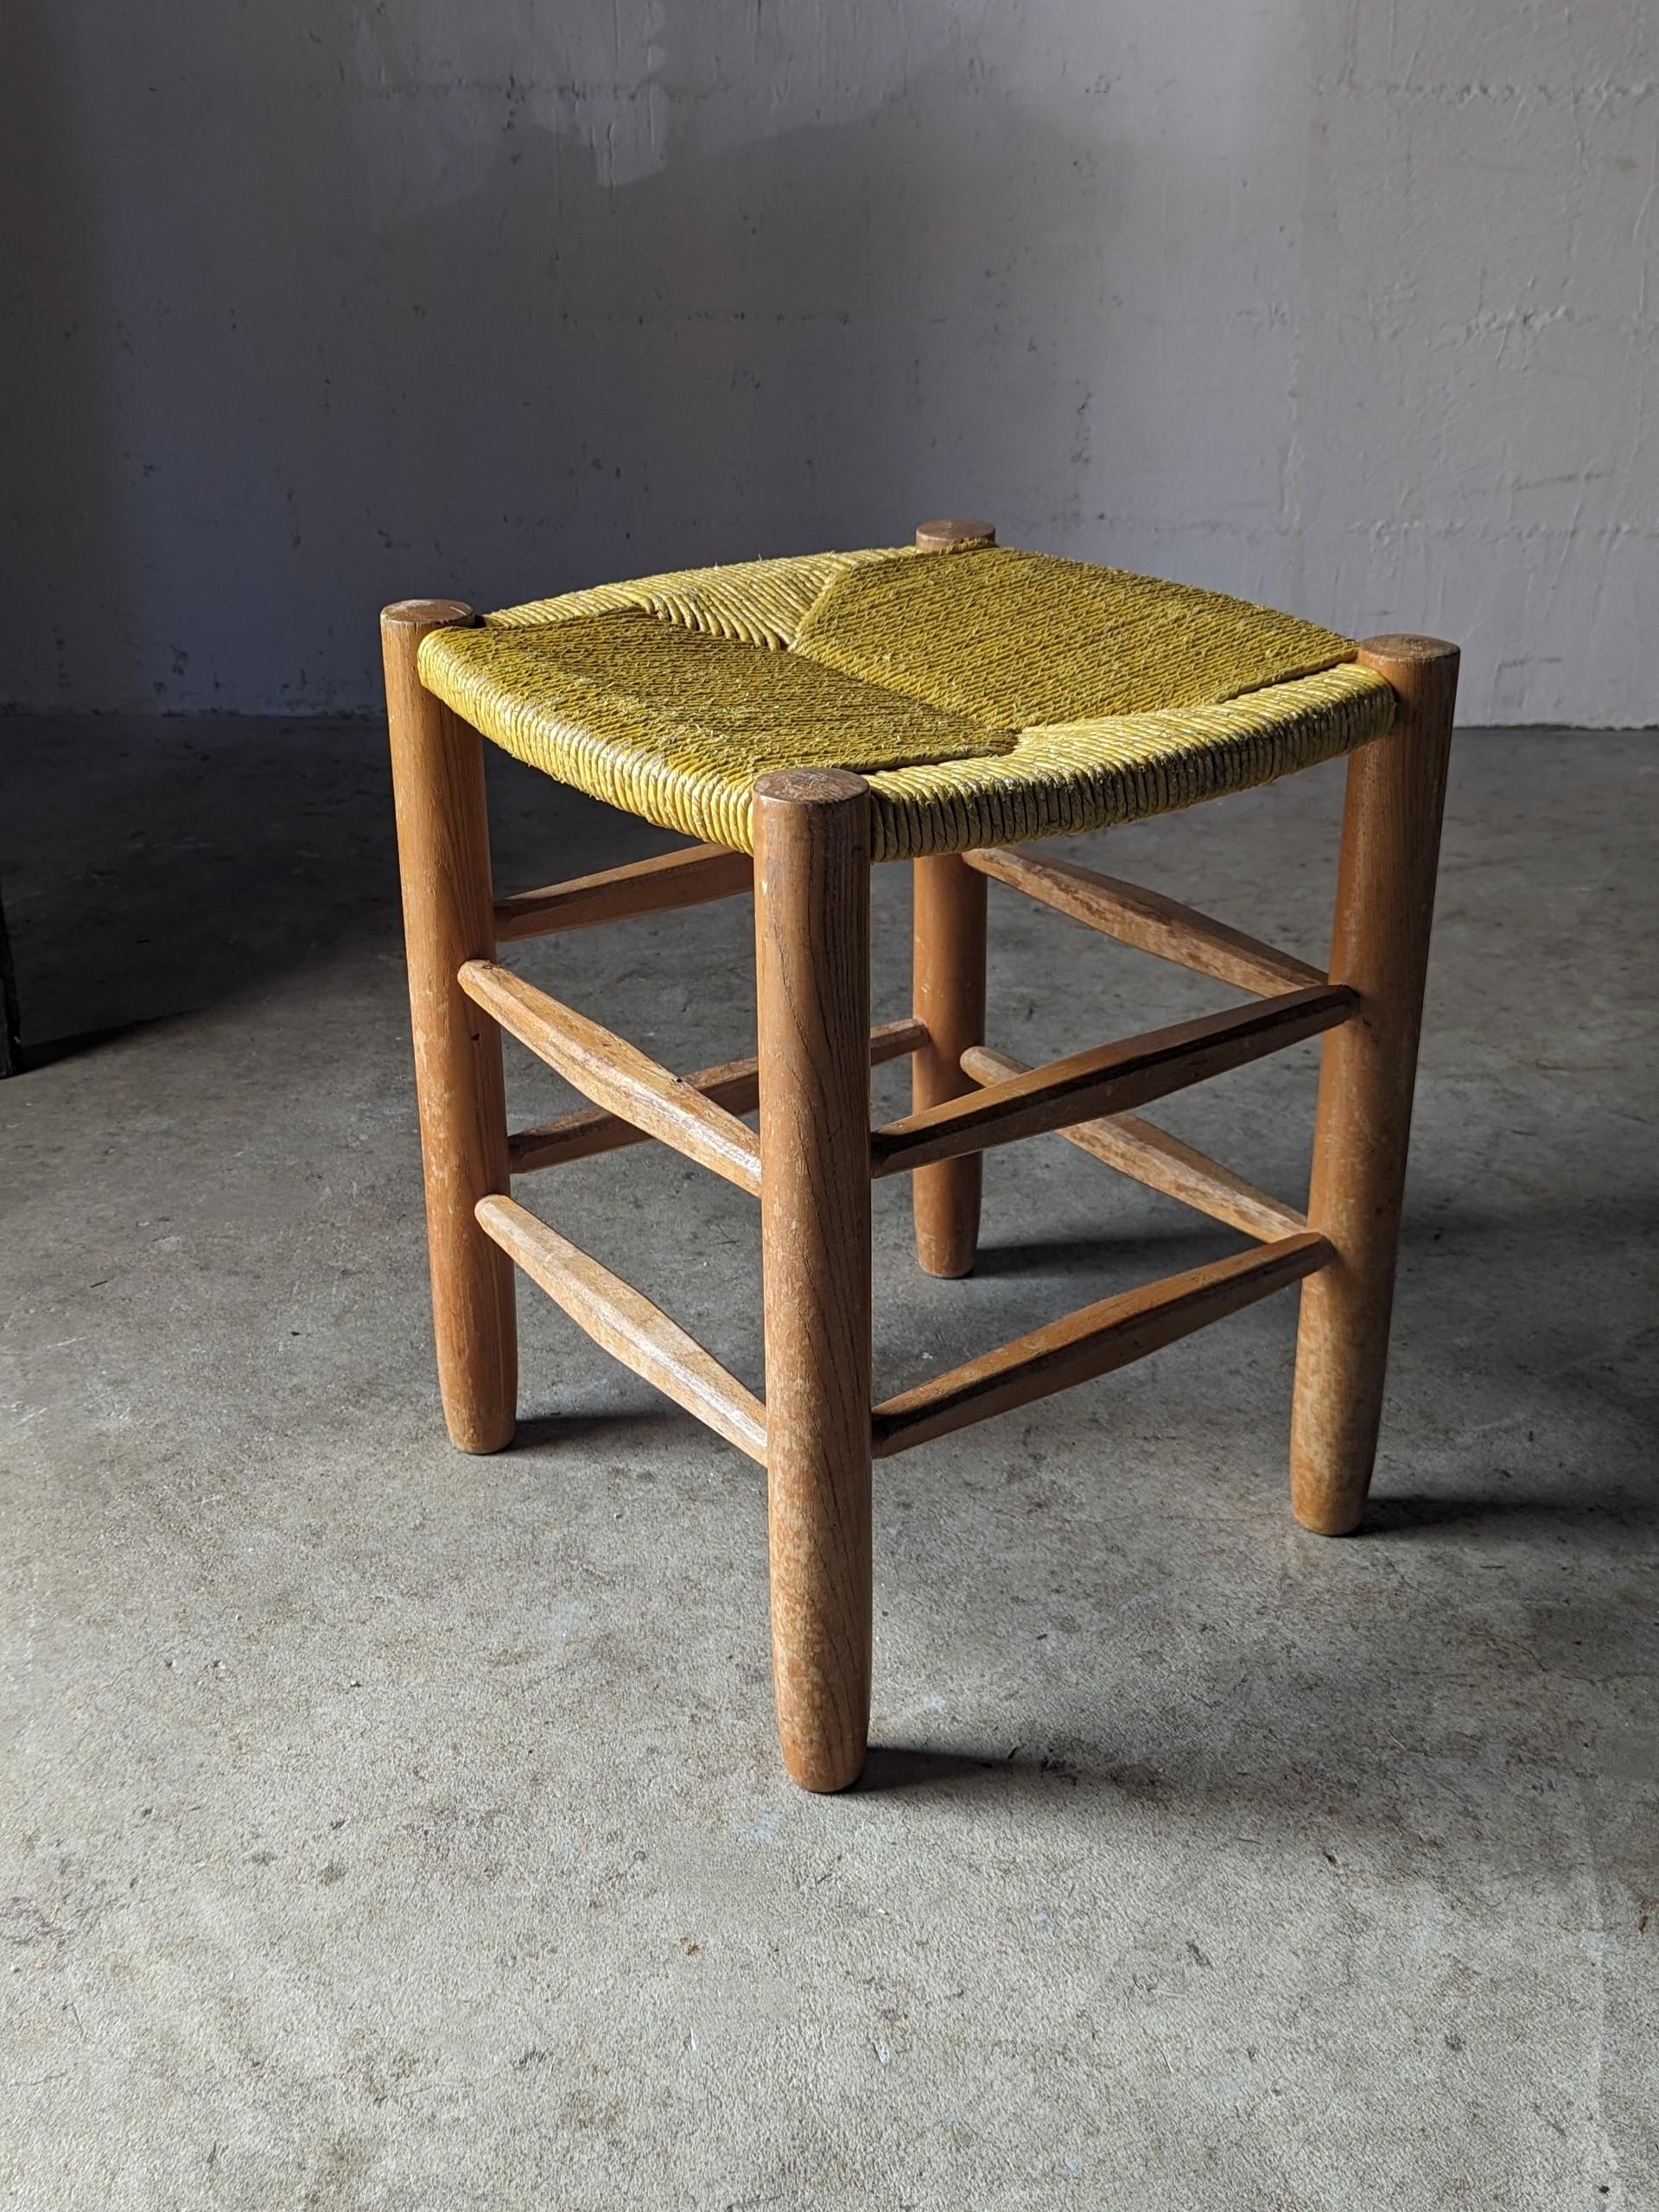 Original N°17 Bauche stool, old edition
ash wood and straw.
untouched patina.
wear and tear on wood and straw.
model created circa 1937/38.
Bibliography : Charlotte Perriand, l'oeuvre complète Volume 2 : 1940-1955, J barsac, Norma Editions, 2015,